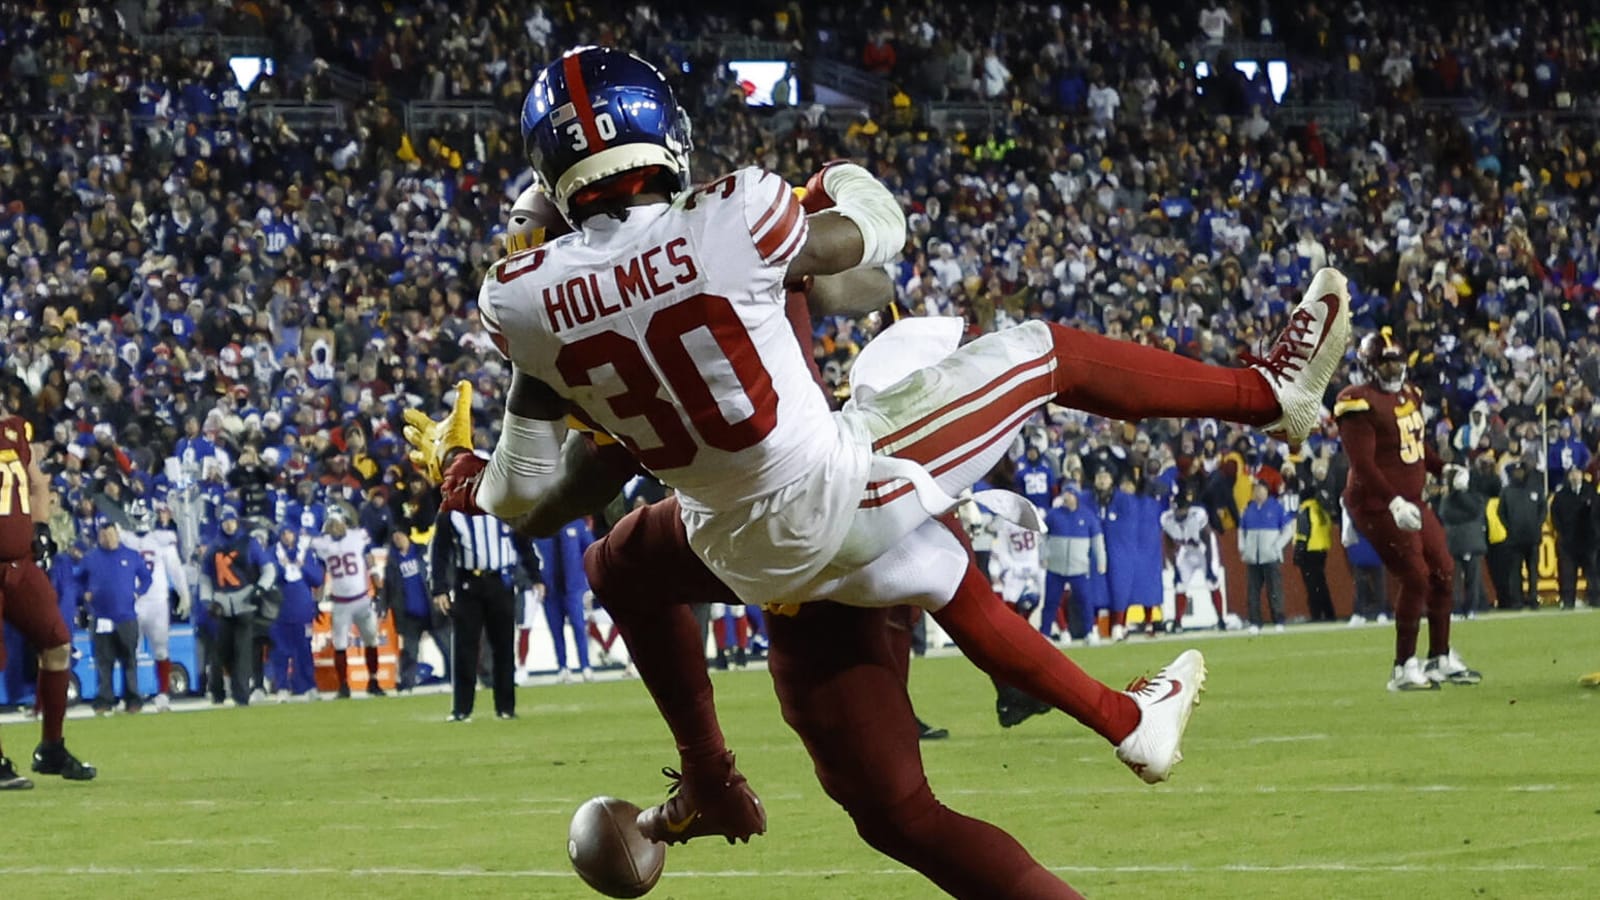 Analyst says pass interference should have been called at end of Commanders-Giants game